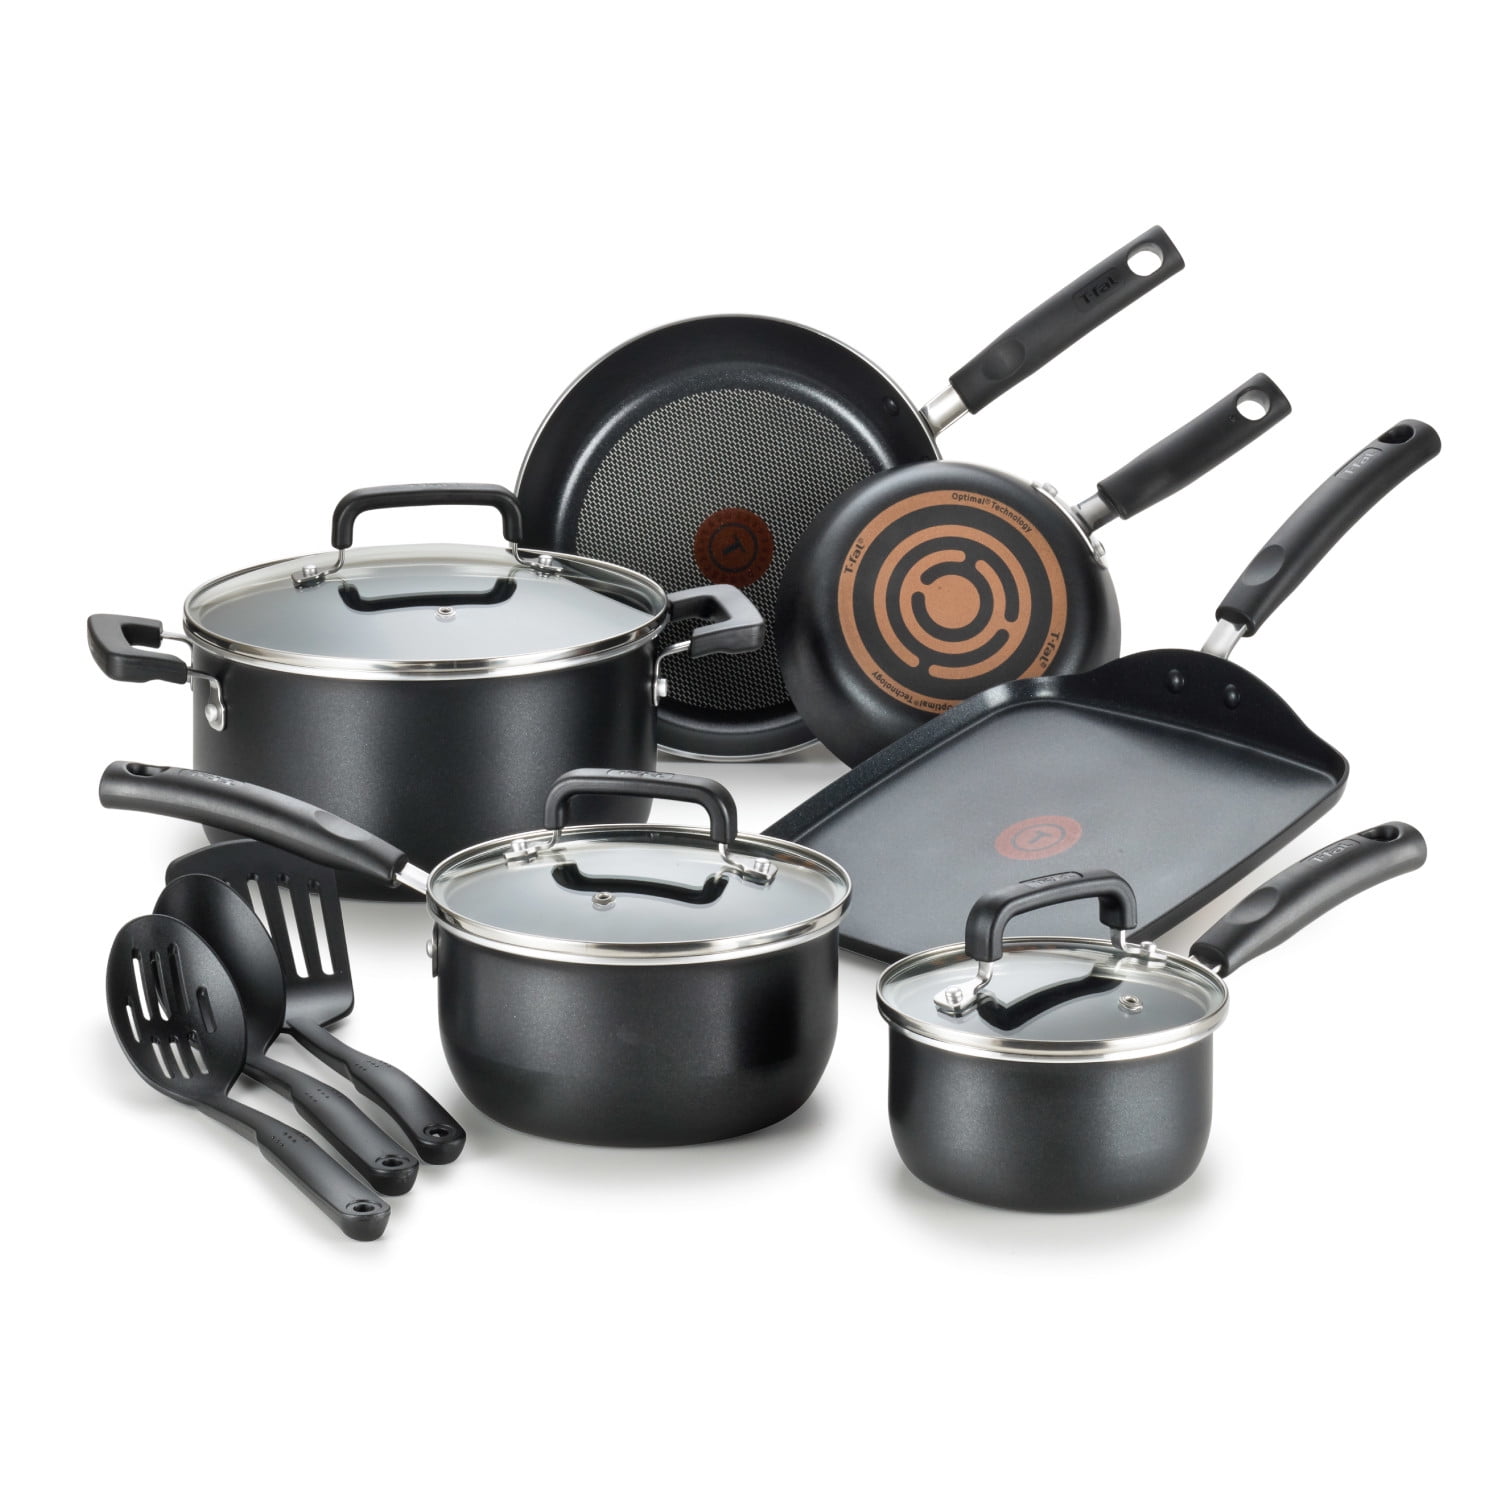 Shineuri 4 Pieces Removable Handle Cookware Stackable Pots and Pans Set, Nonstick Pot and Pan Set for Home & Camping, Dishwasher/Oven Safe - 2qt